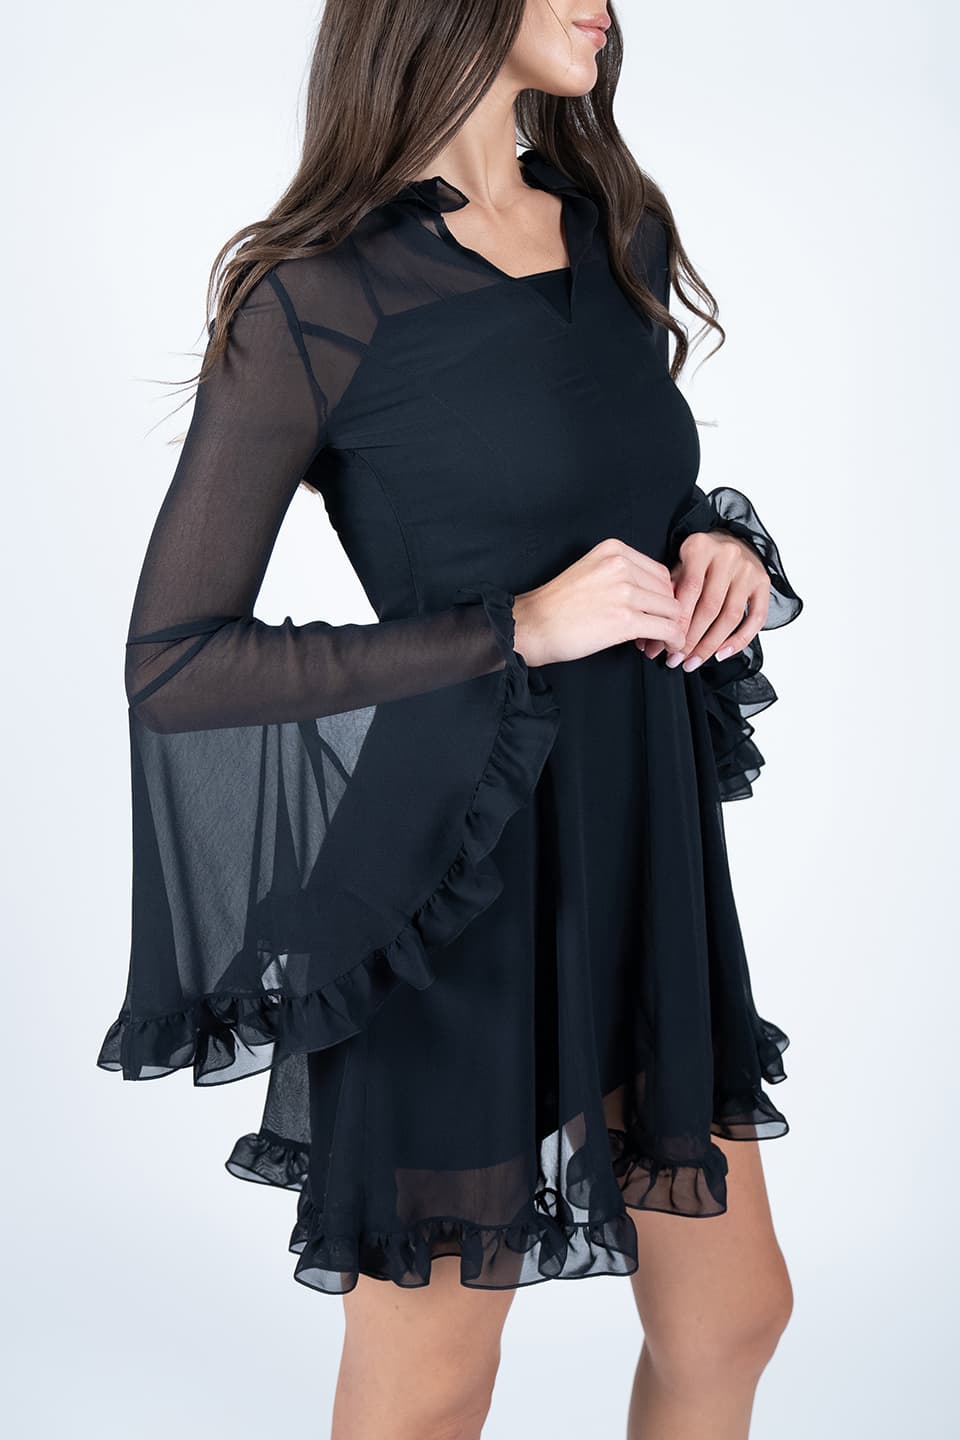 Thumbnail for Product gallery 2, Georgette Mini Black Dress with Ruffles